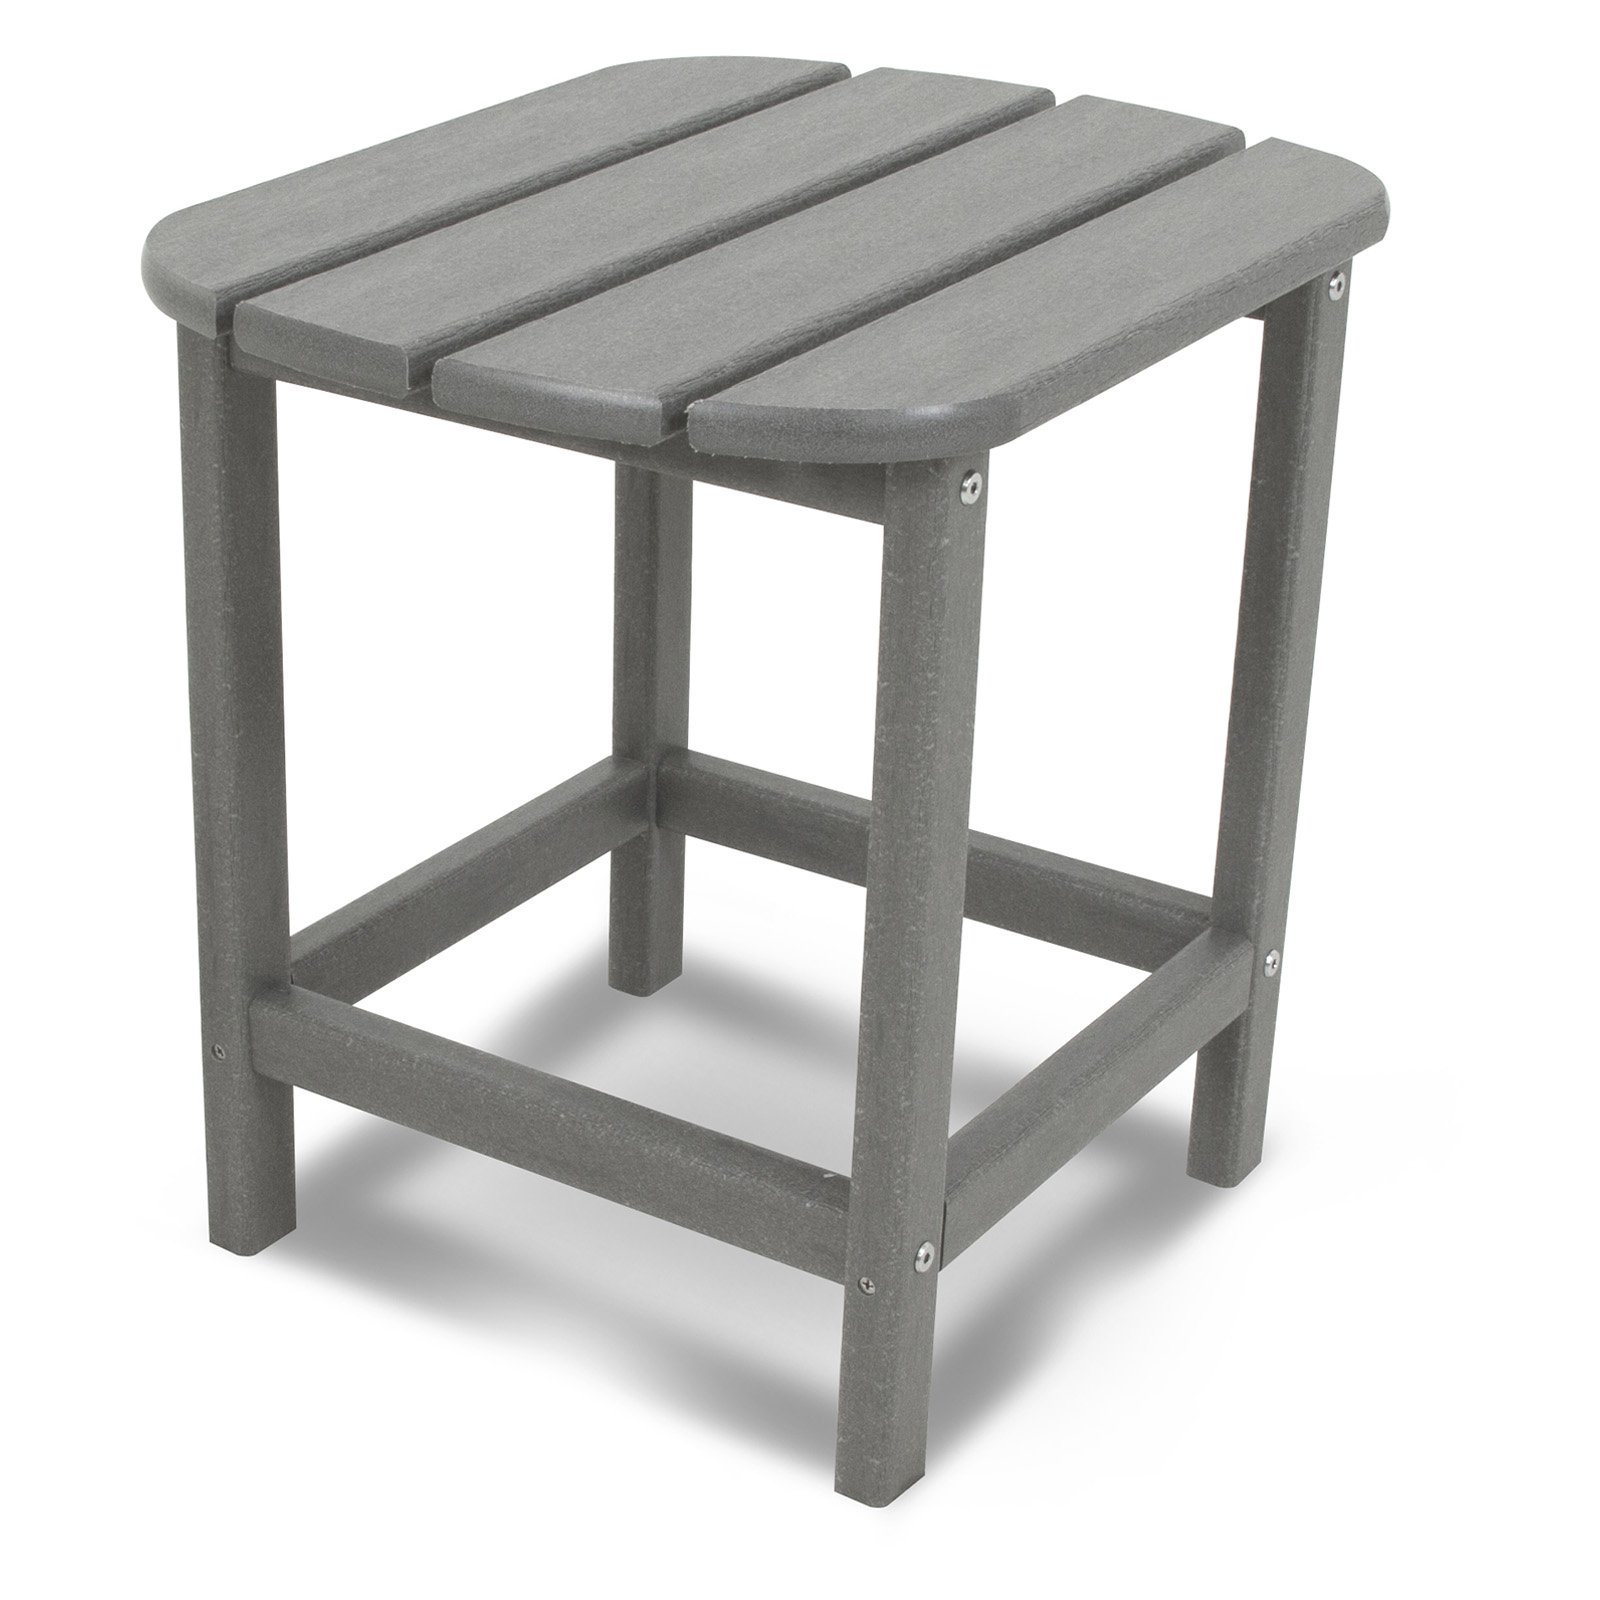 POLYWOOD&reg; South Beach Recycled Plastic 18 in. Side Table - image 1 of 4